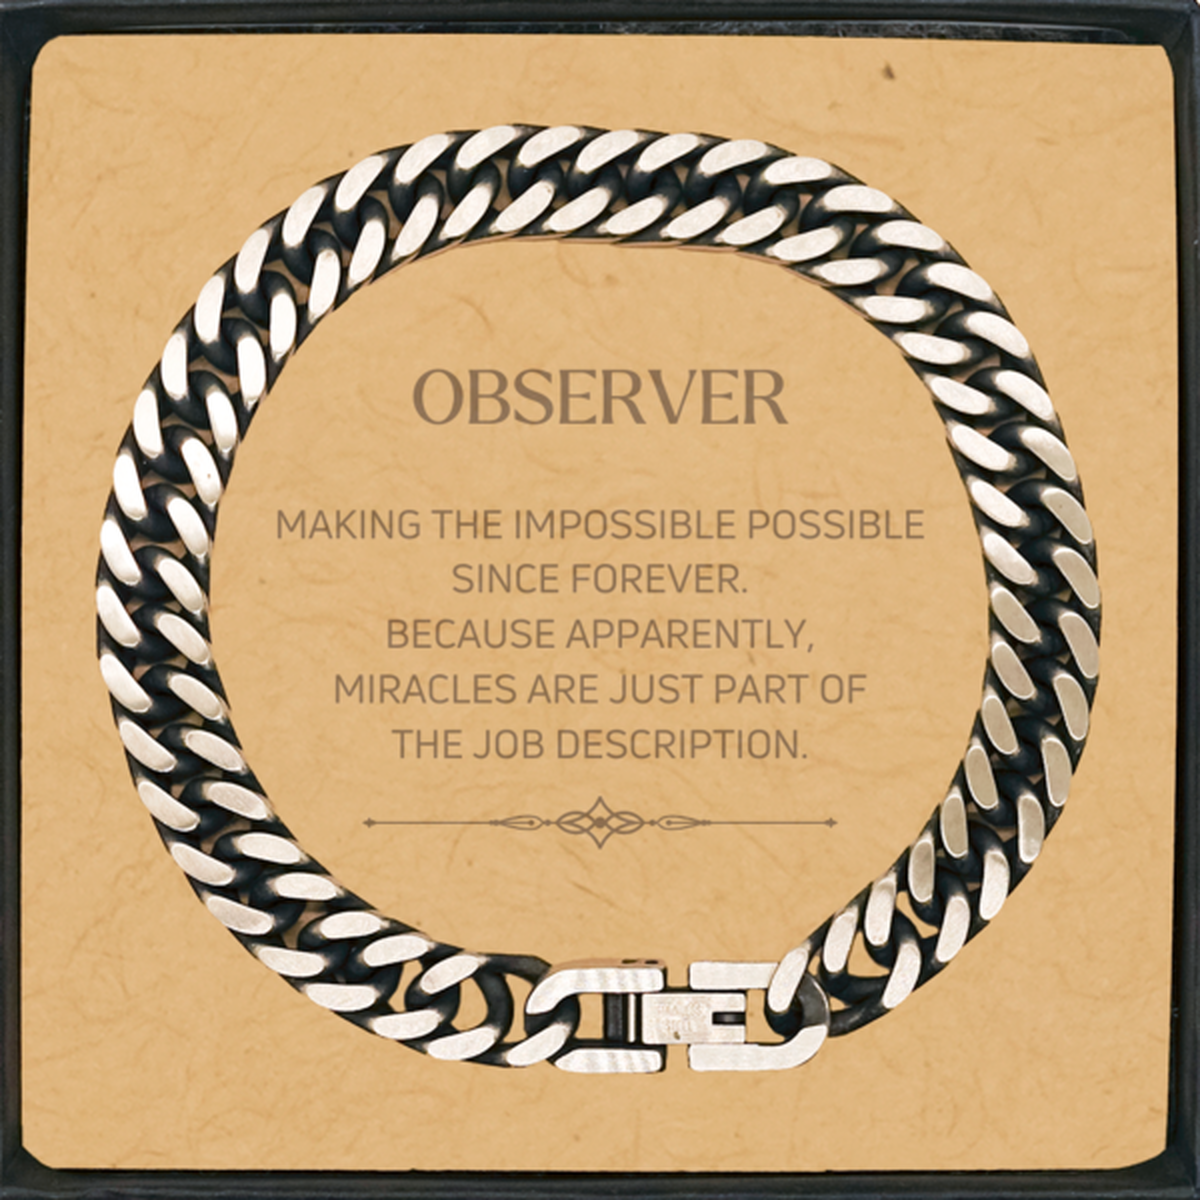 Funny Observer Gifts, Miracles are just part of the job description, Inspirational Birthday Cuban Link Chain Bracelet For Observer, Men, Women, Coworkers, Friends, Boss